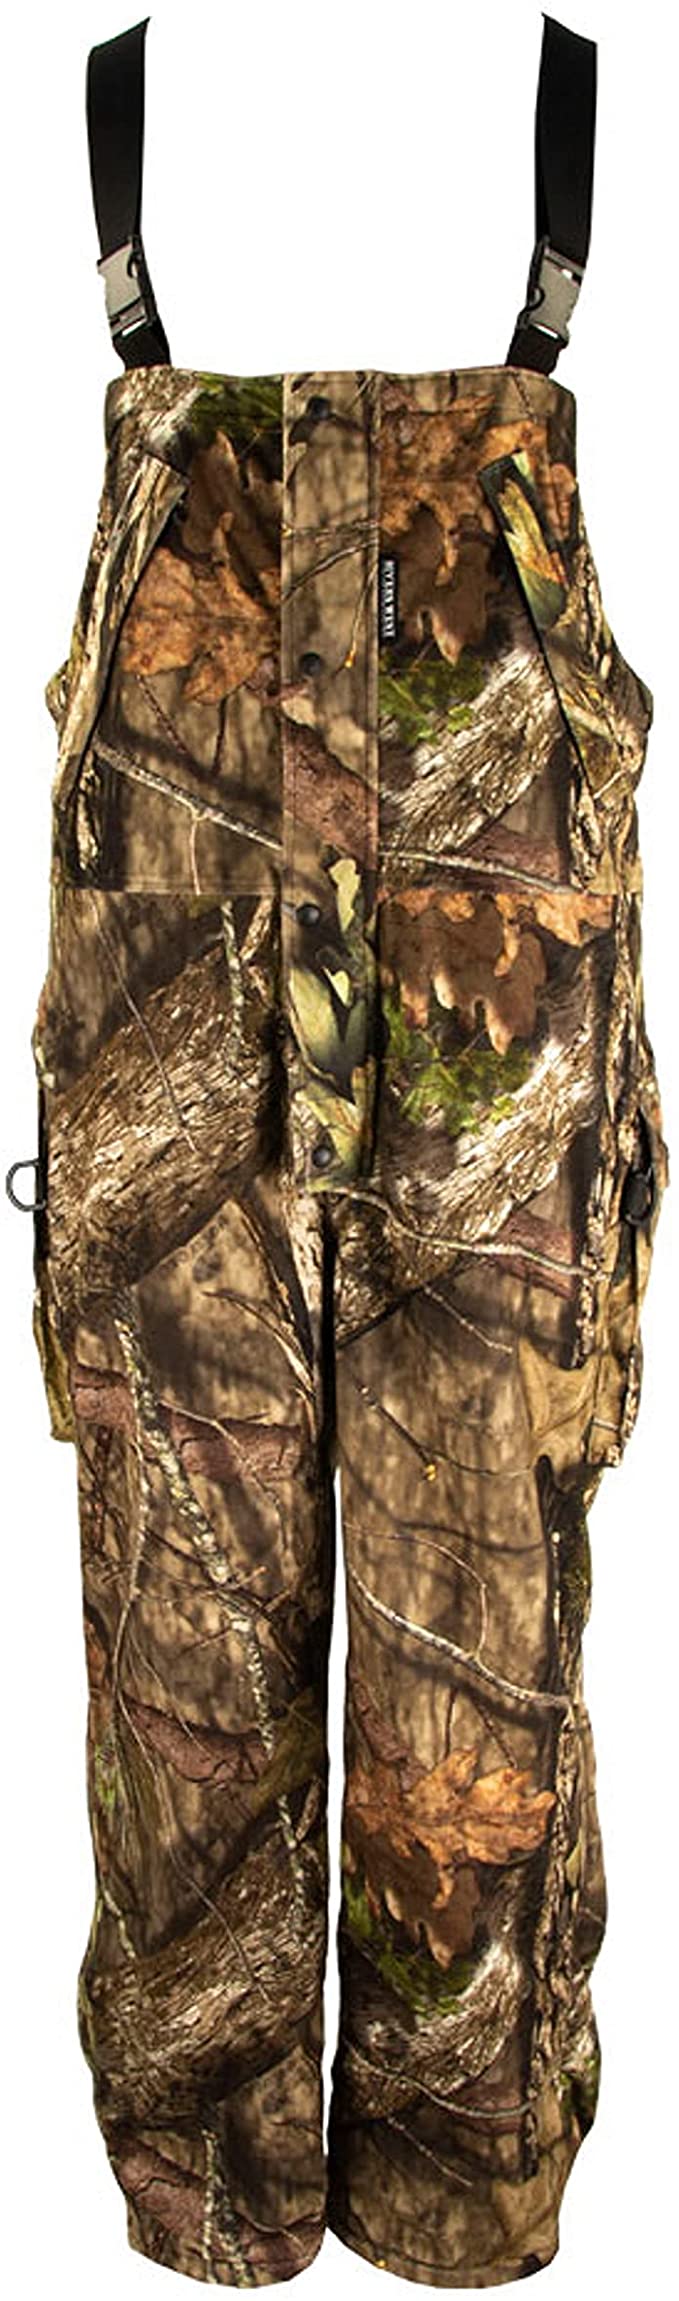 The 6 Best Insulated Hunting Bibs of 2022 Apocalypse Guys